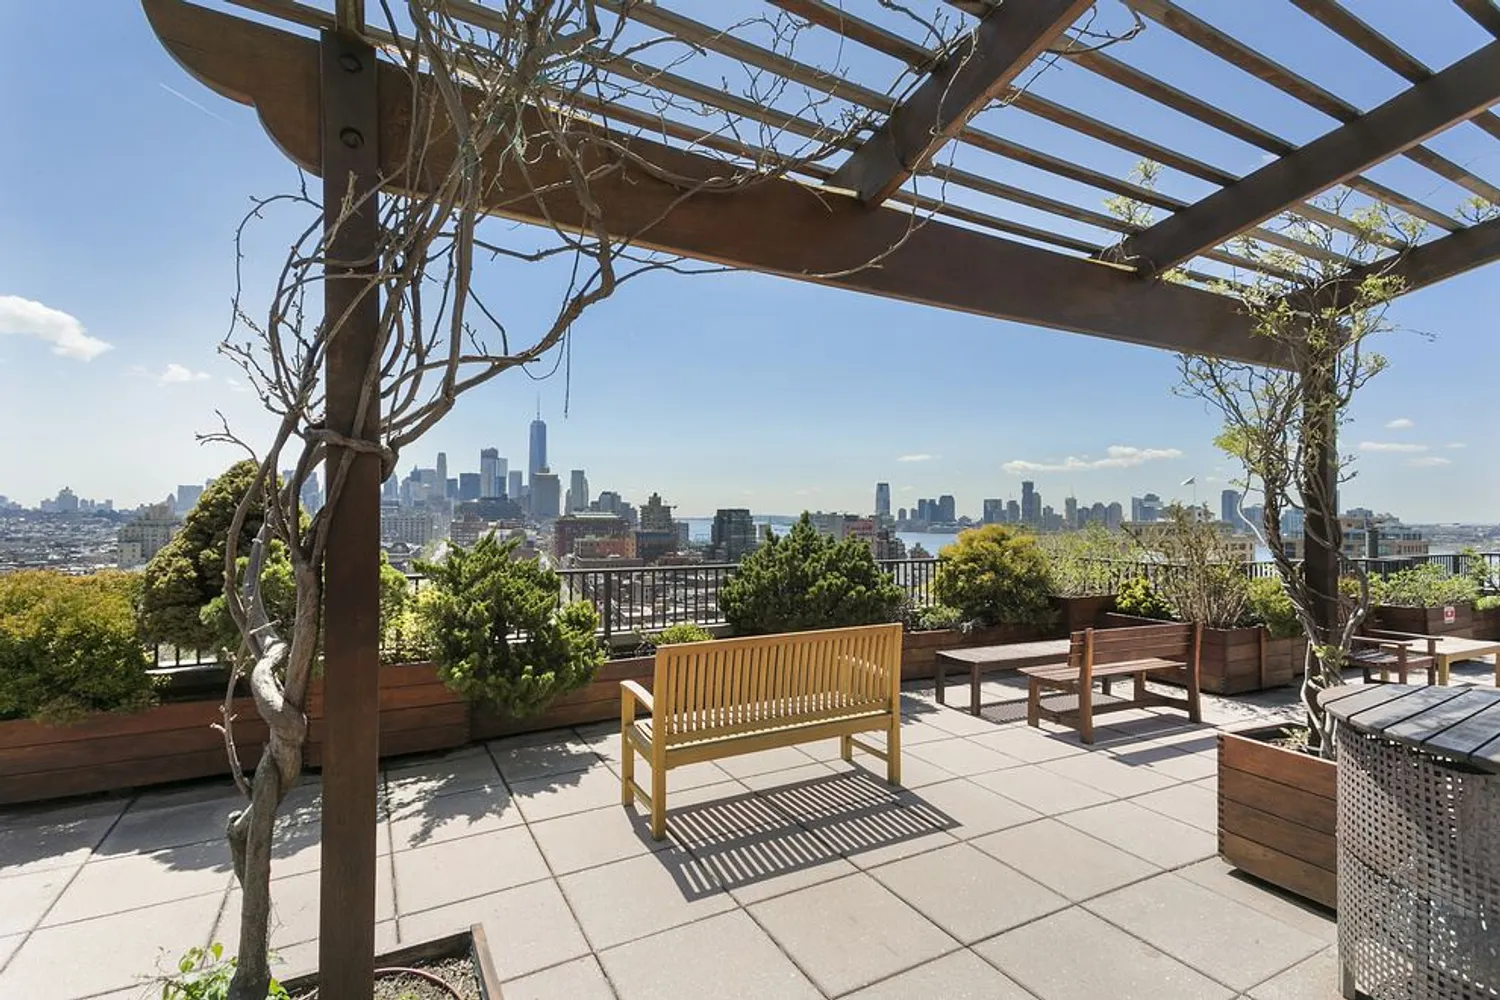 Landscaped roof deck with 360 degree views